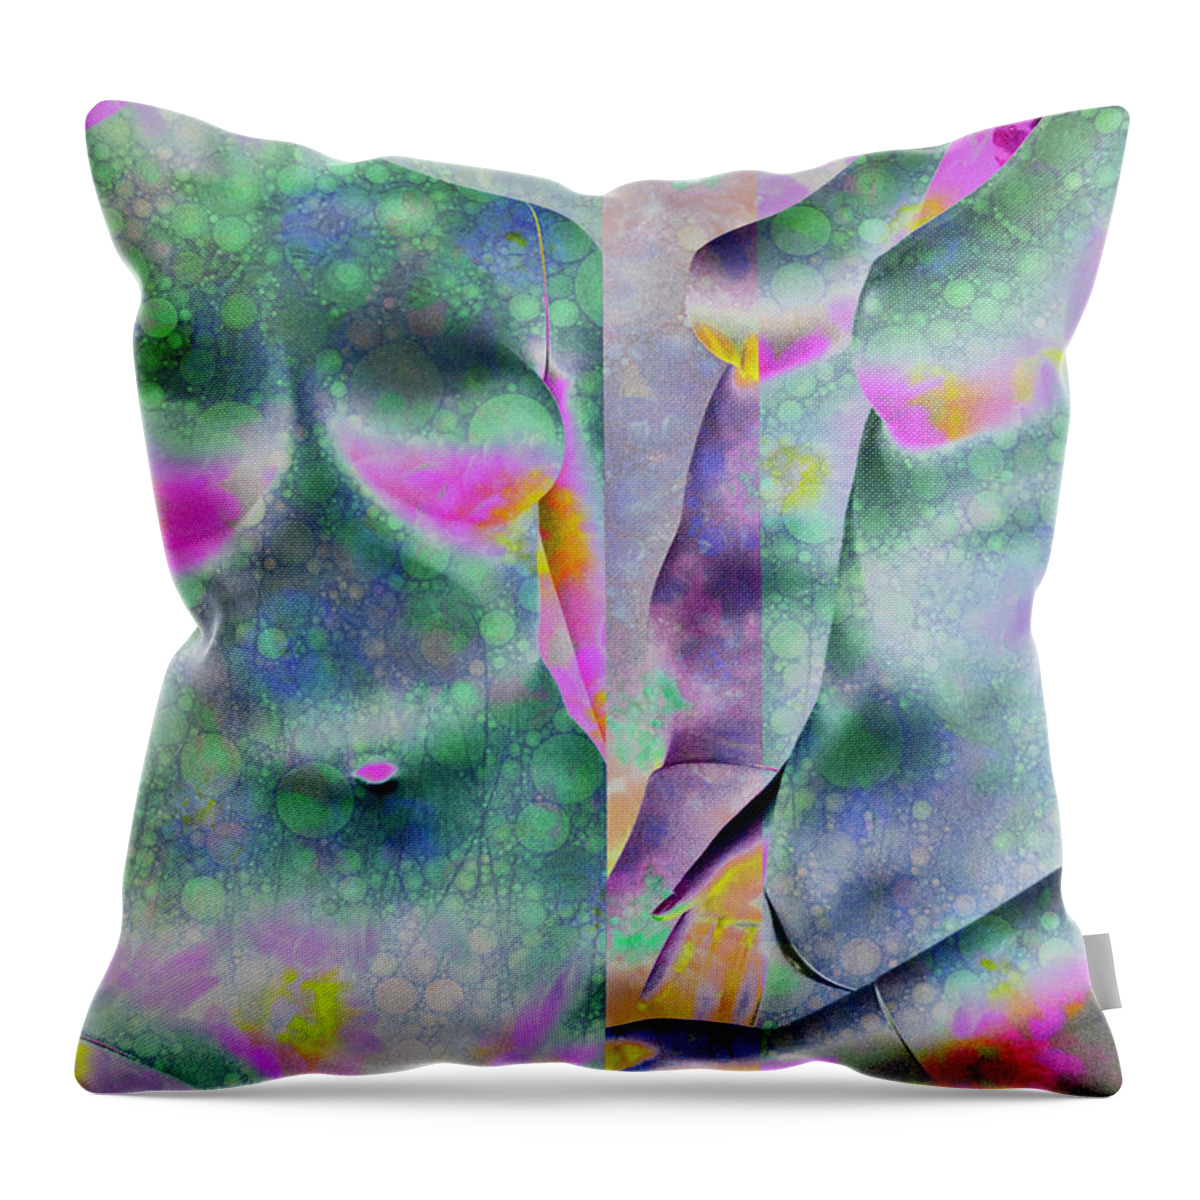 Eastwick Throw Pillow featuring the digital art Eastwick by Skip Hunt